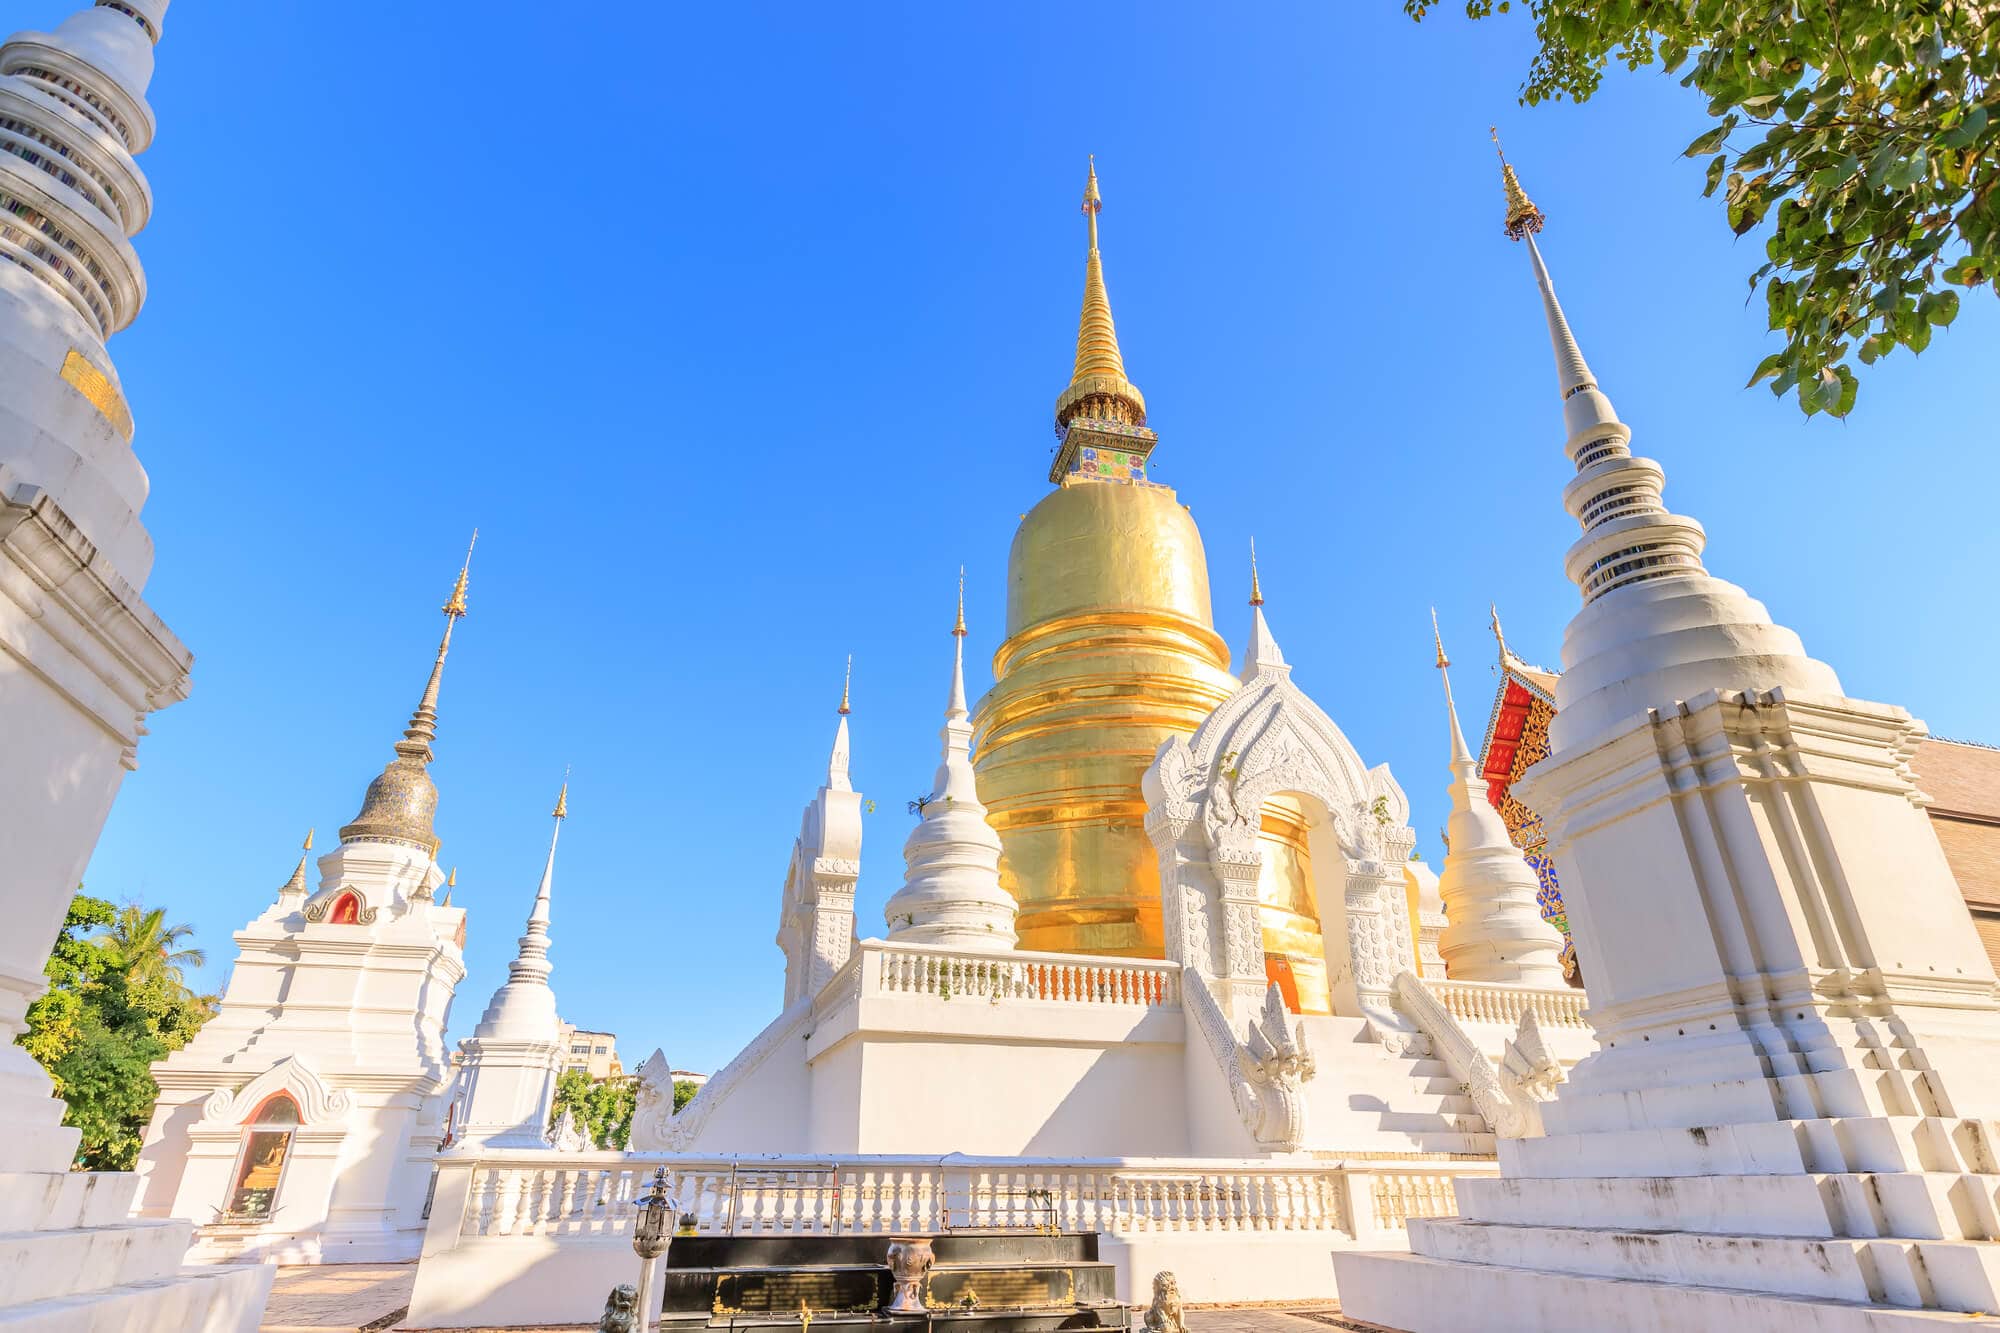 White and gold chedis against the blue sky at the impressive Wat Suan Dok temple in Chiang Mai.